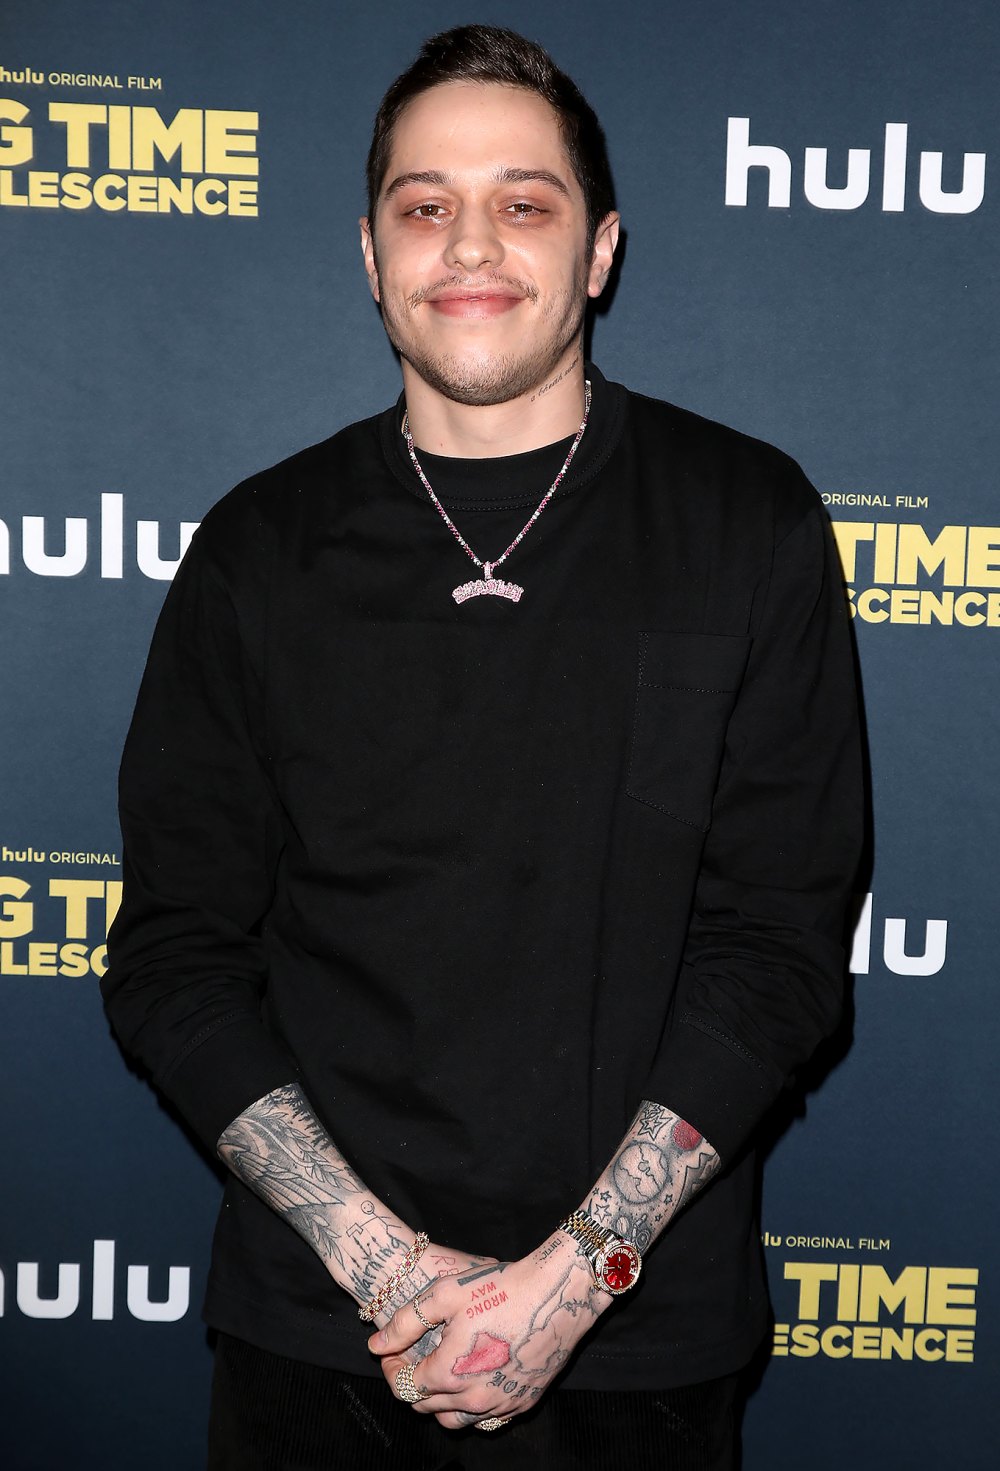 Pete Davidson in Rehab After Struggling With PTSD